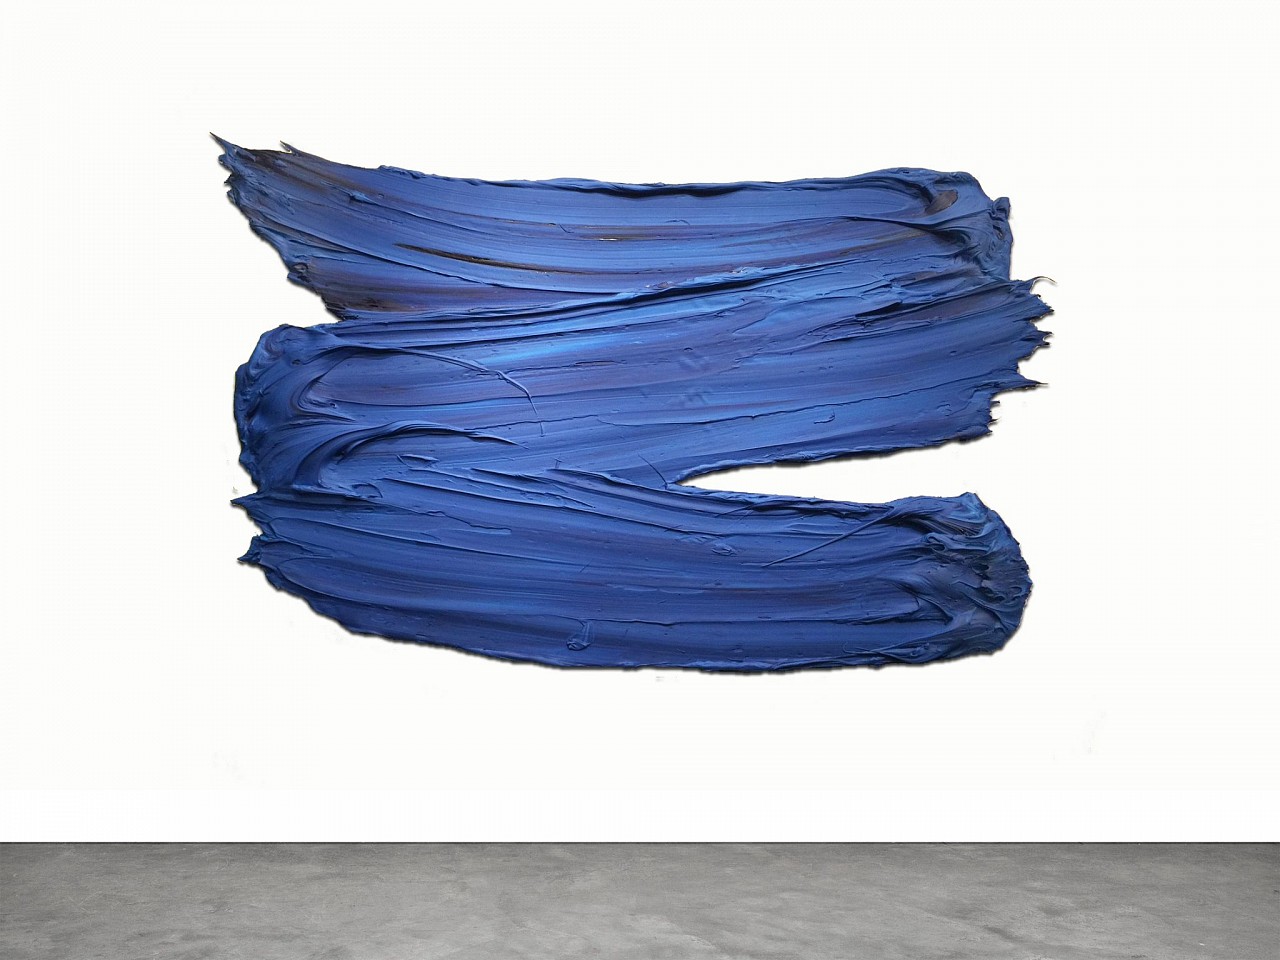 Donald Martiny, Kamba, 2016
polymer and pigment on aluminum, 40 x 65 in.
MART0032